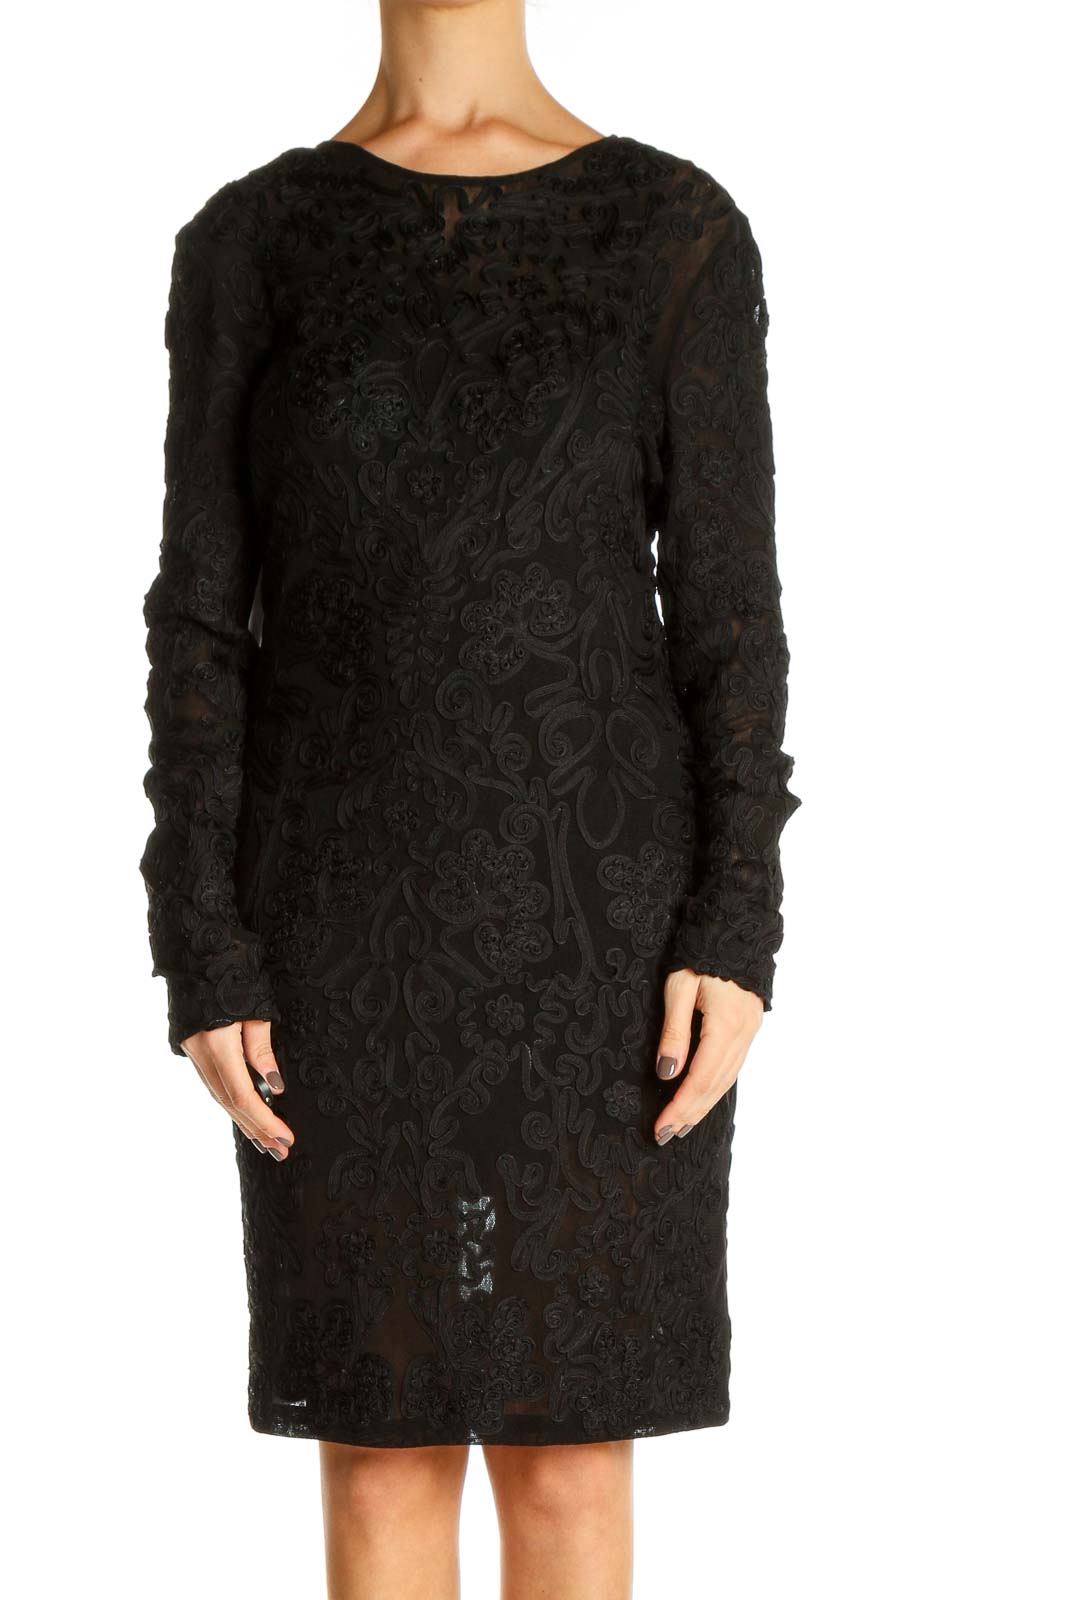 Black Lace Long Sleeve Dress Front